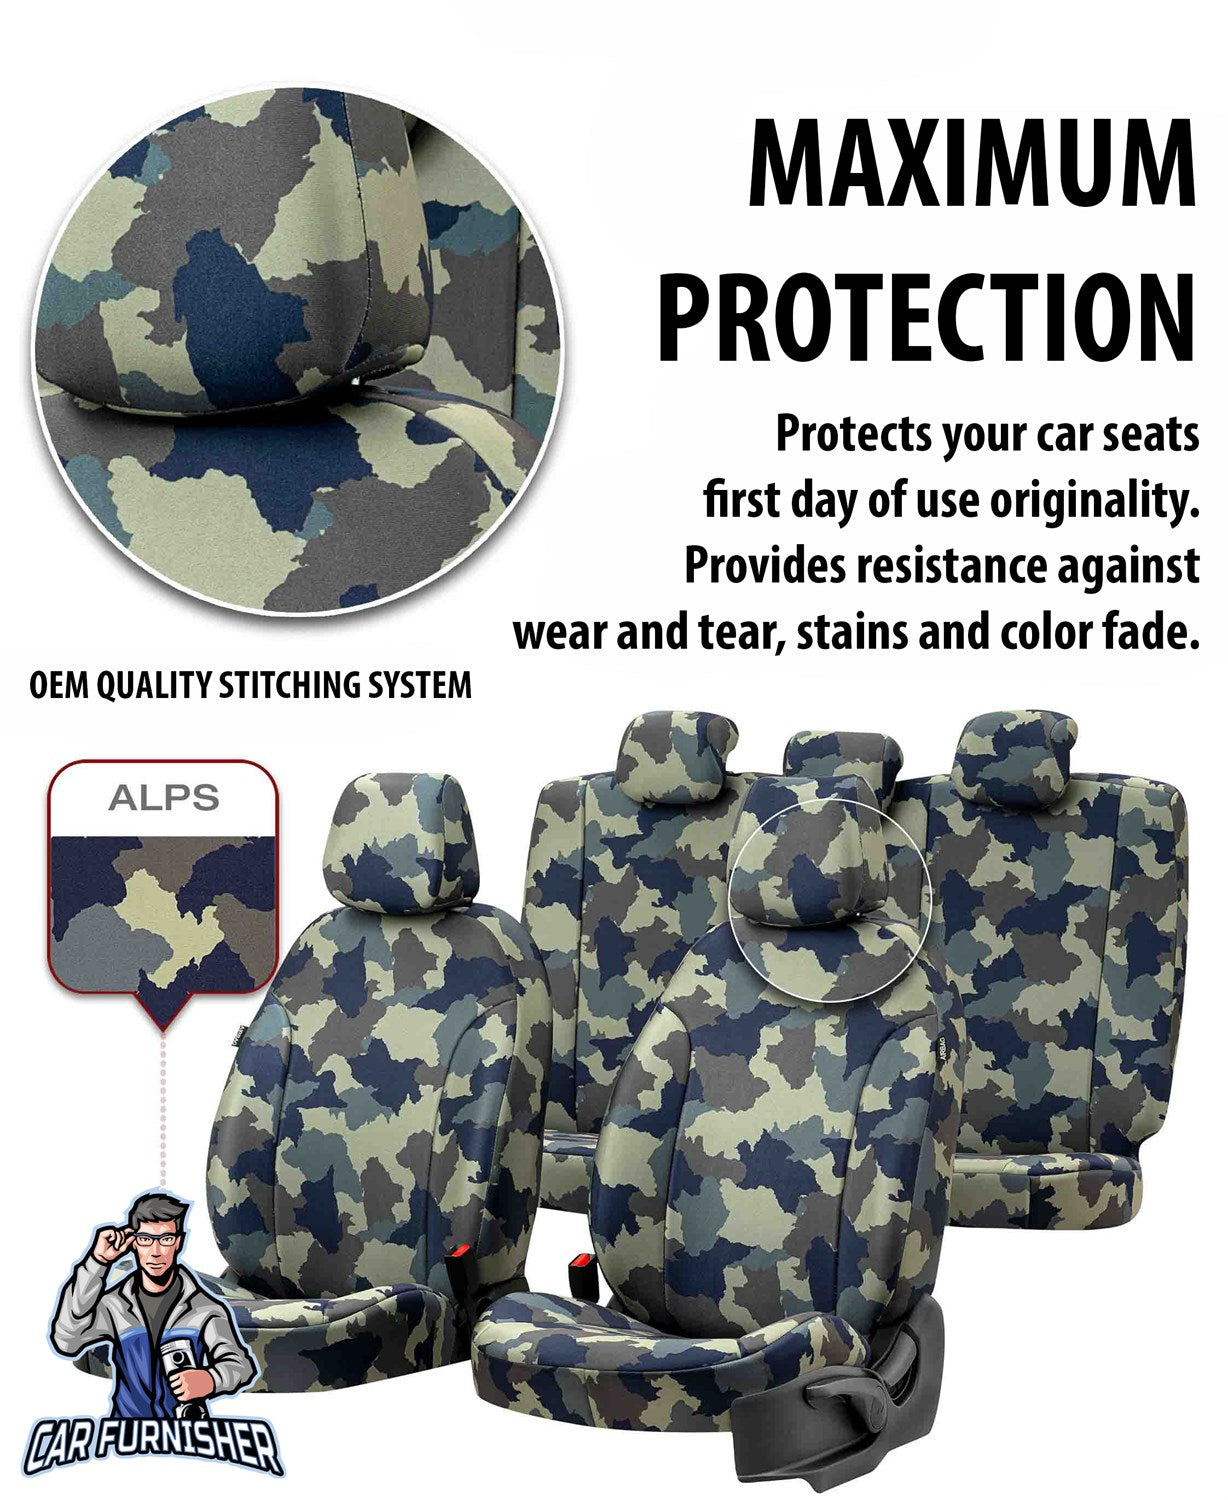 Ford Tourneo Courier Seat Covers Camouflage Waterproof Design Gobi Camo Waterproof Fabric